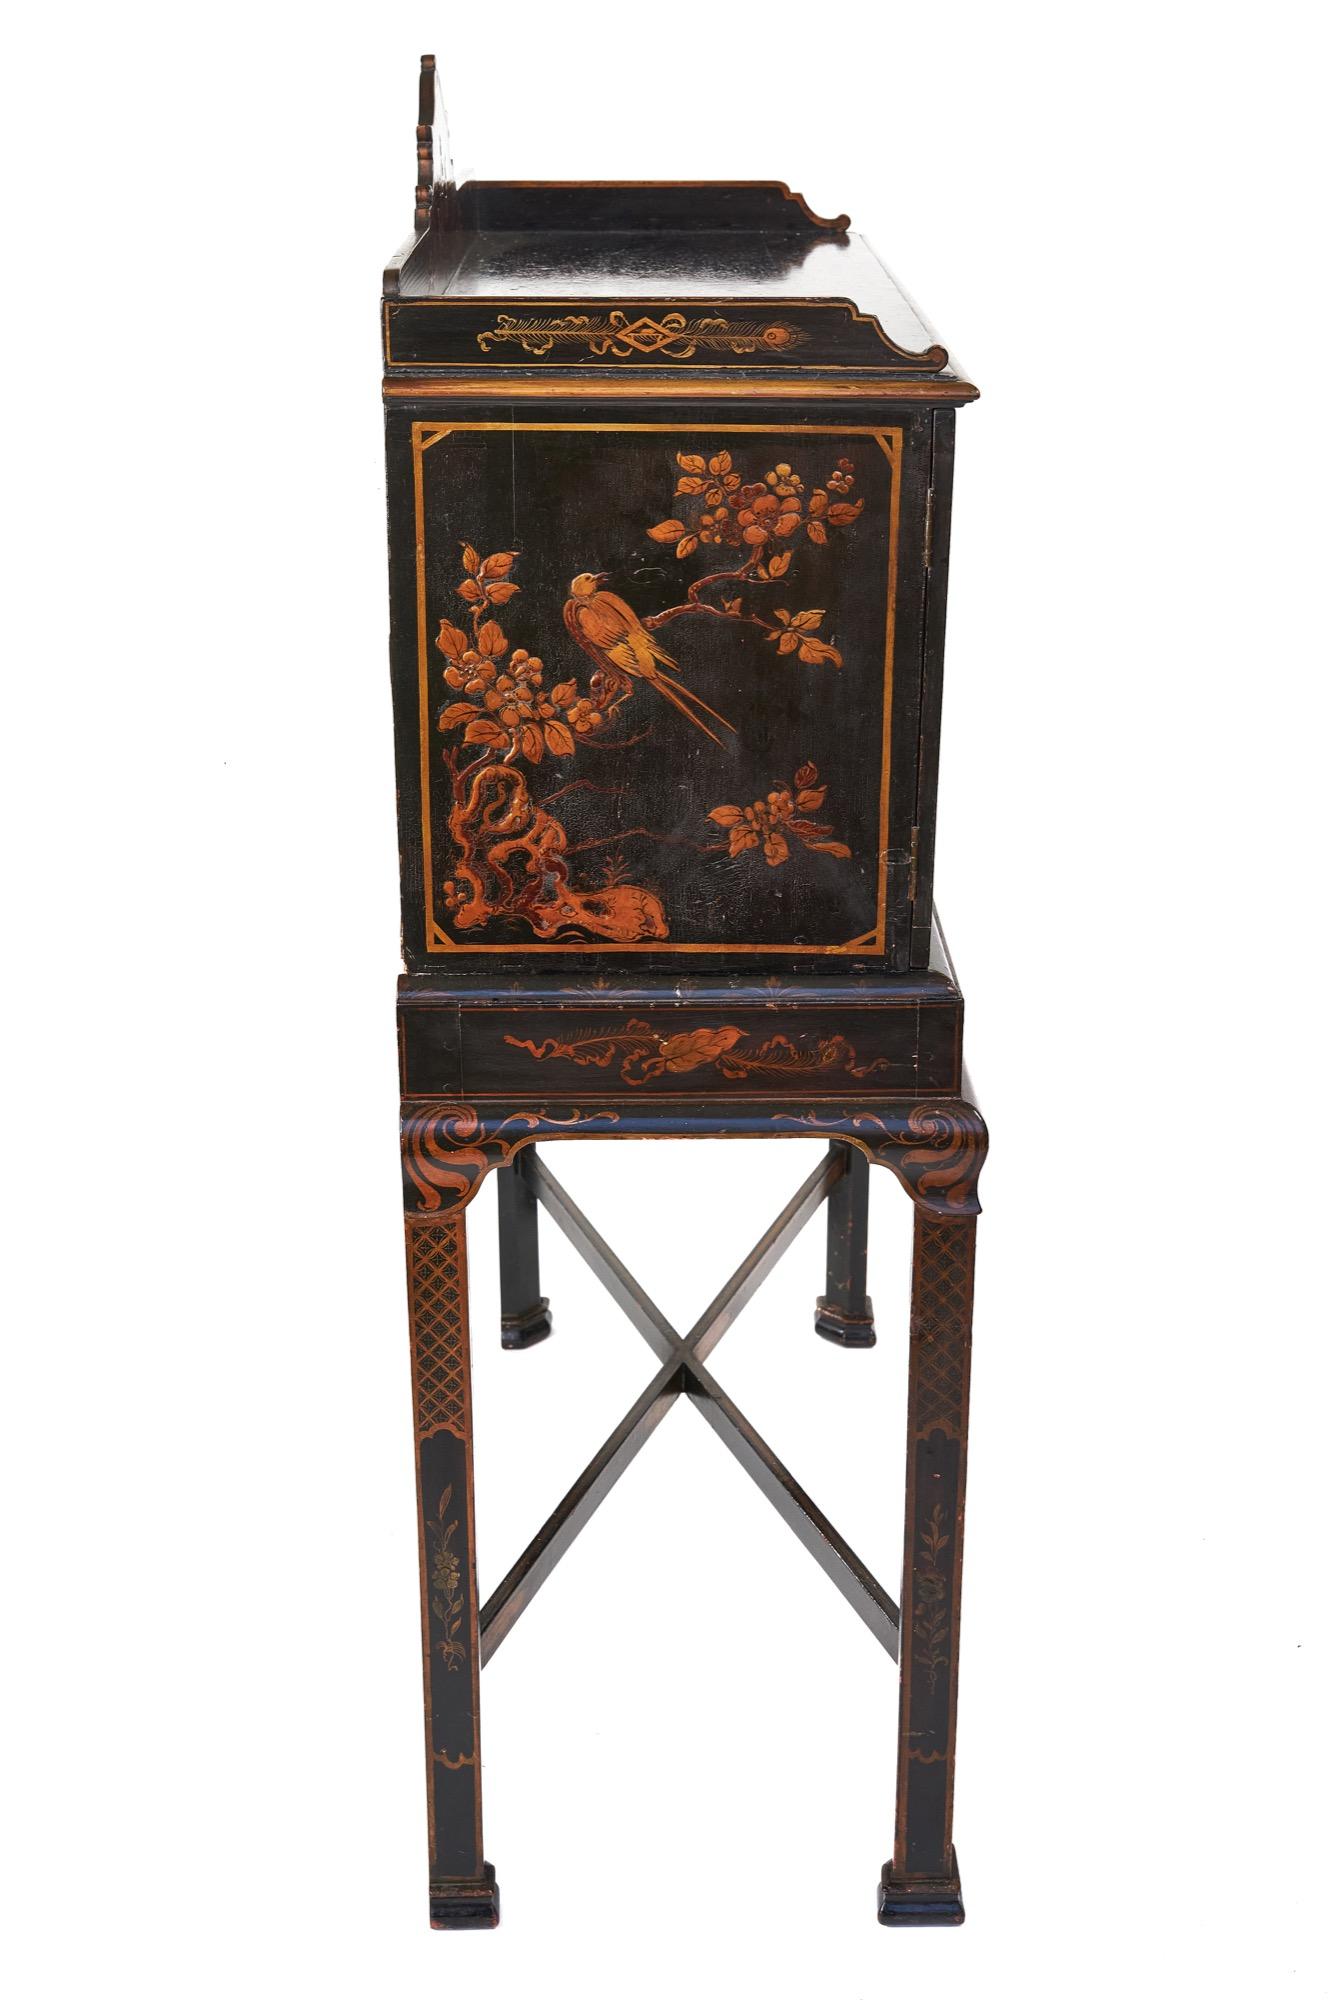 Laqué Fine chinoiserie Decorated Fitted 8 Drawer Cabinet on Stand en vente